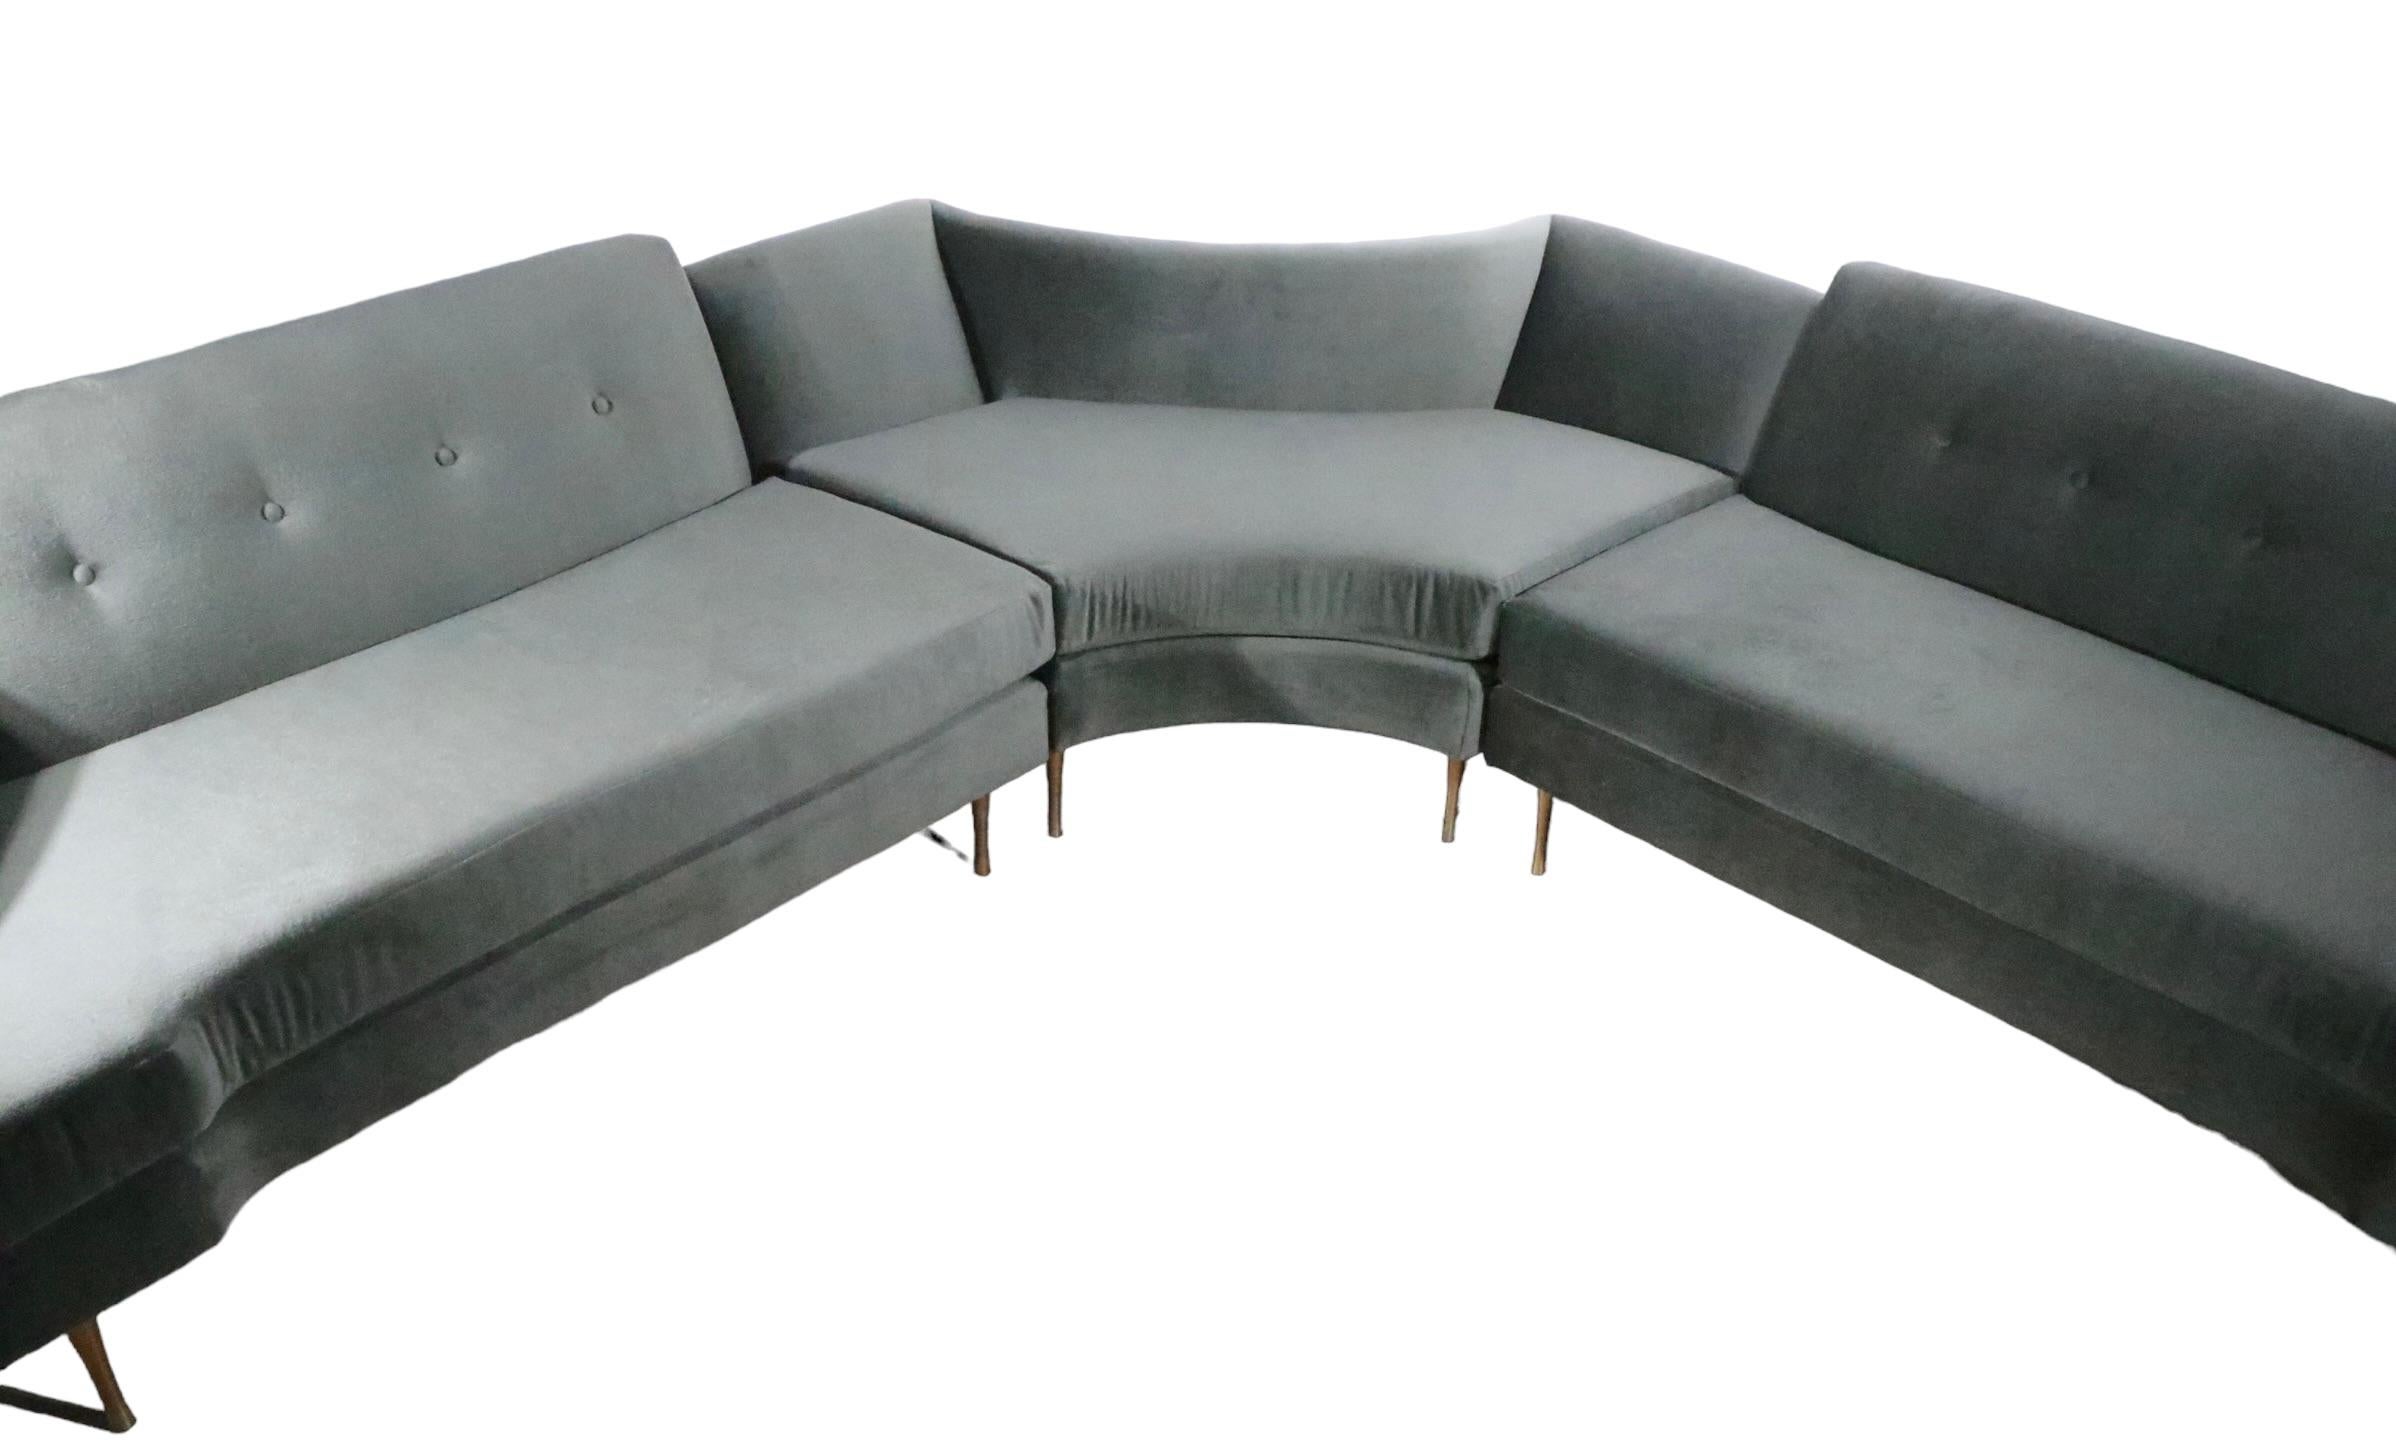 Glamorous Hollywood Regency Mid Century Art Deco Sectional Sofa c 1930s/1950s In Good Condition For Sale In New York, NY